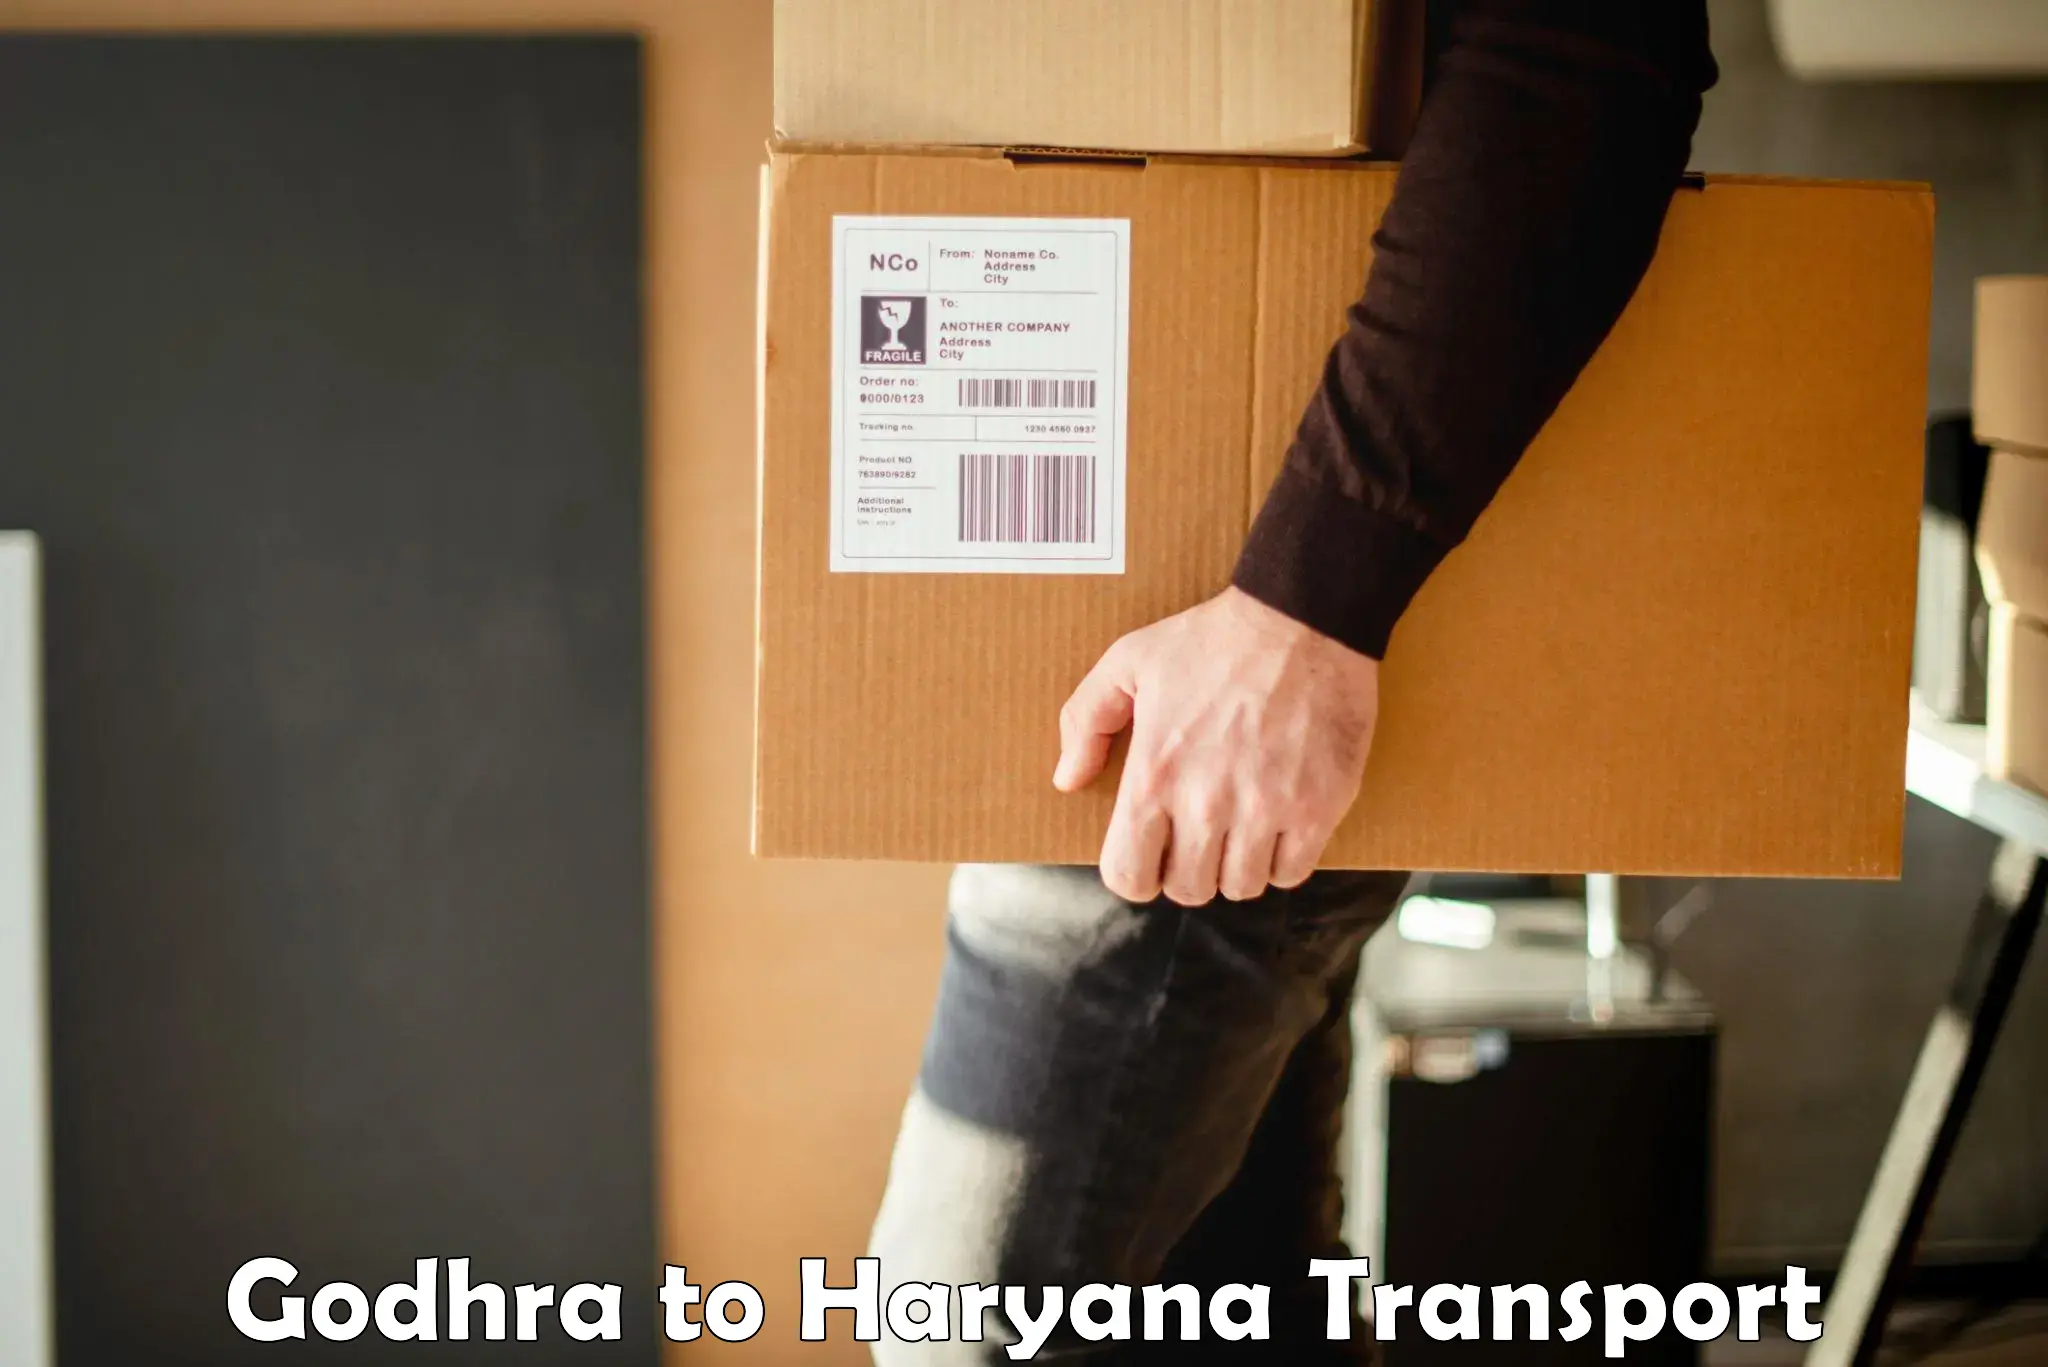 Truck transport companies in India Godhra to Hodal